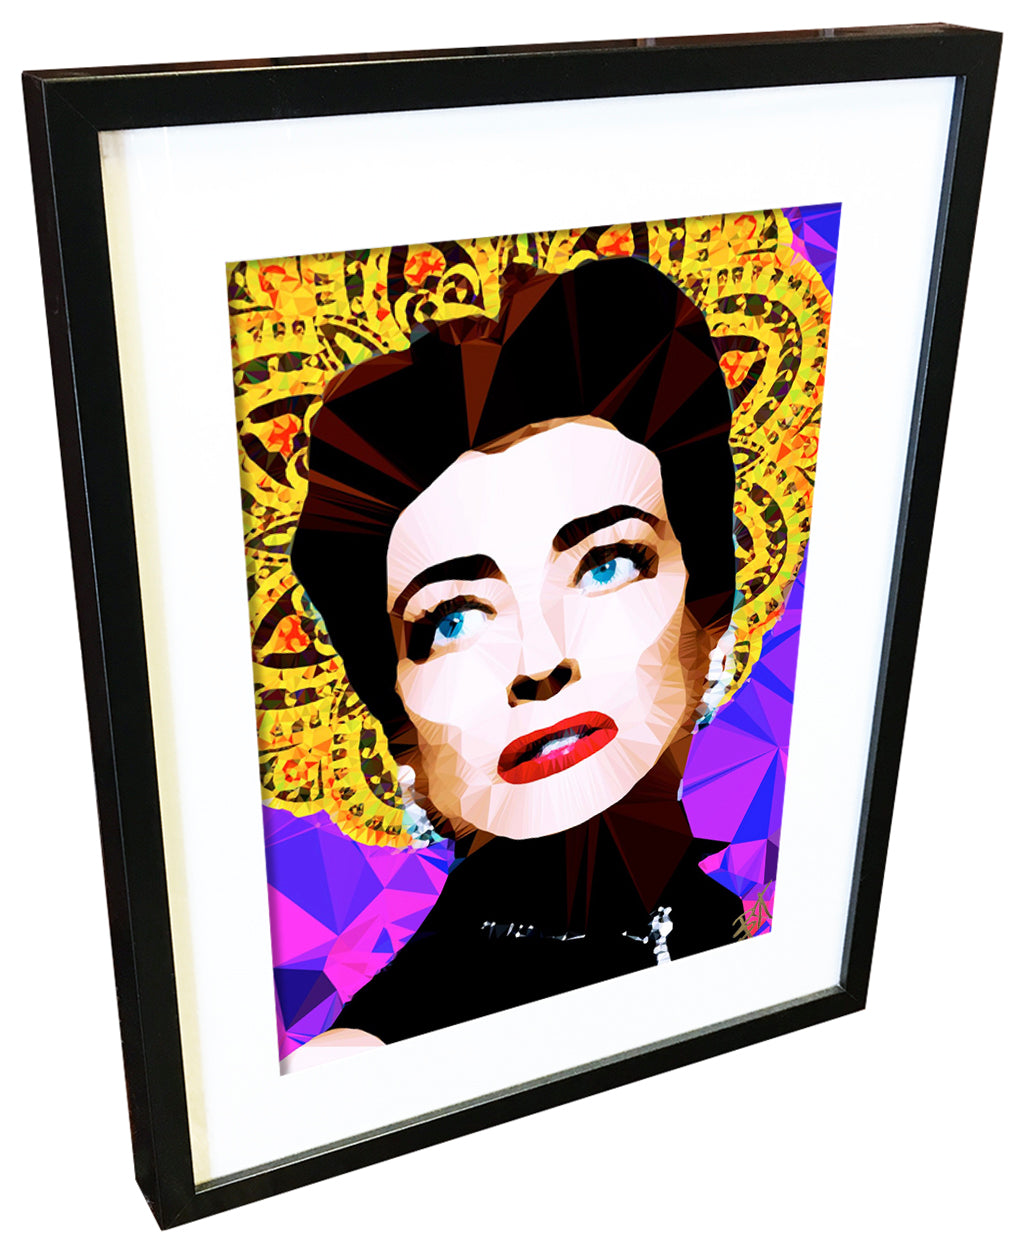 Joan Crawford #1 by Baiba Auria - signed art print - Egoiste Gallery - Art Gallery in Manchester City Centre